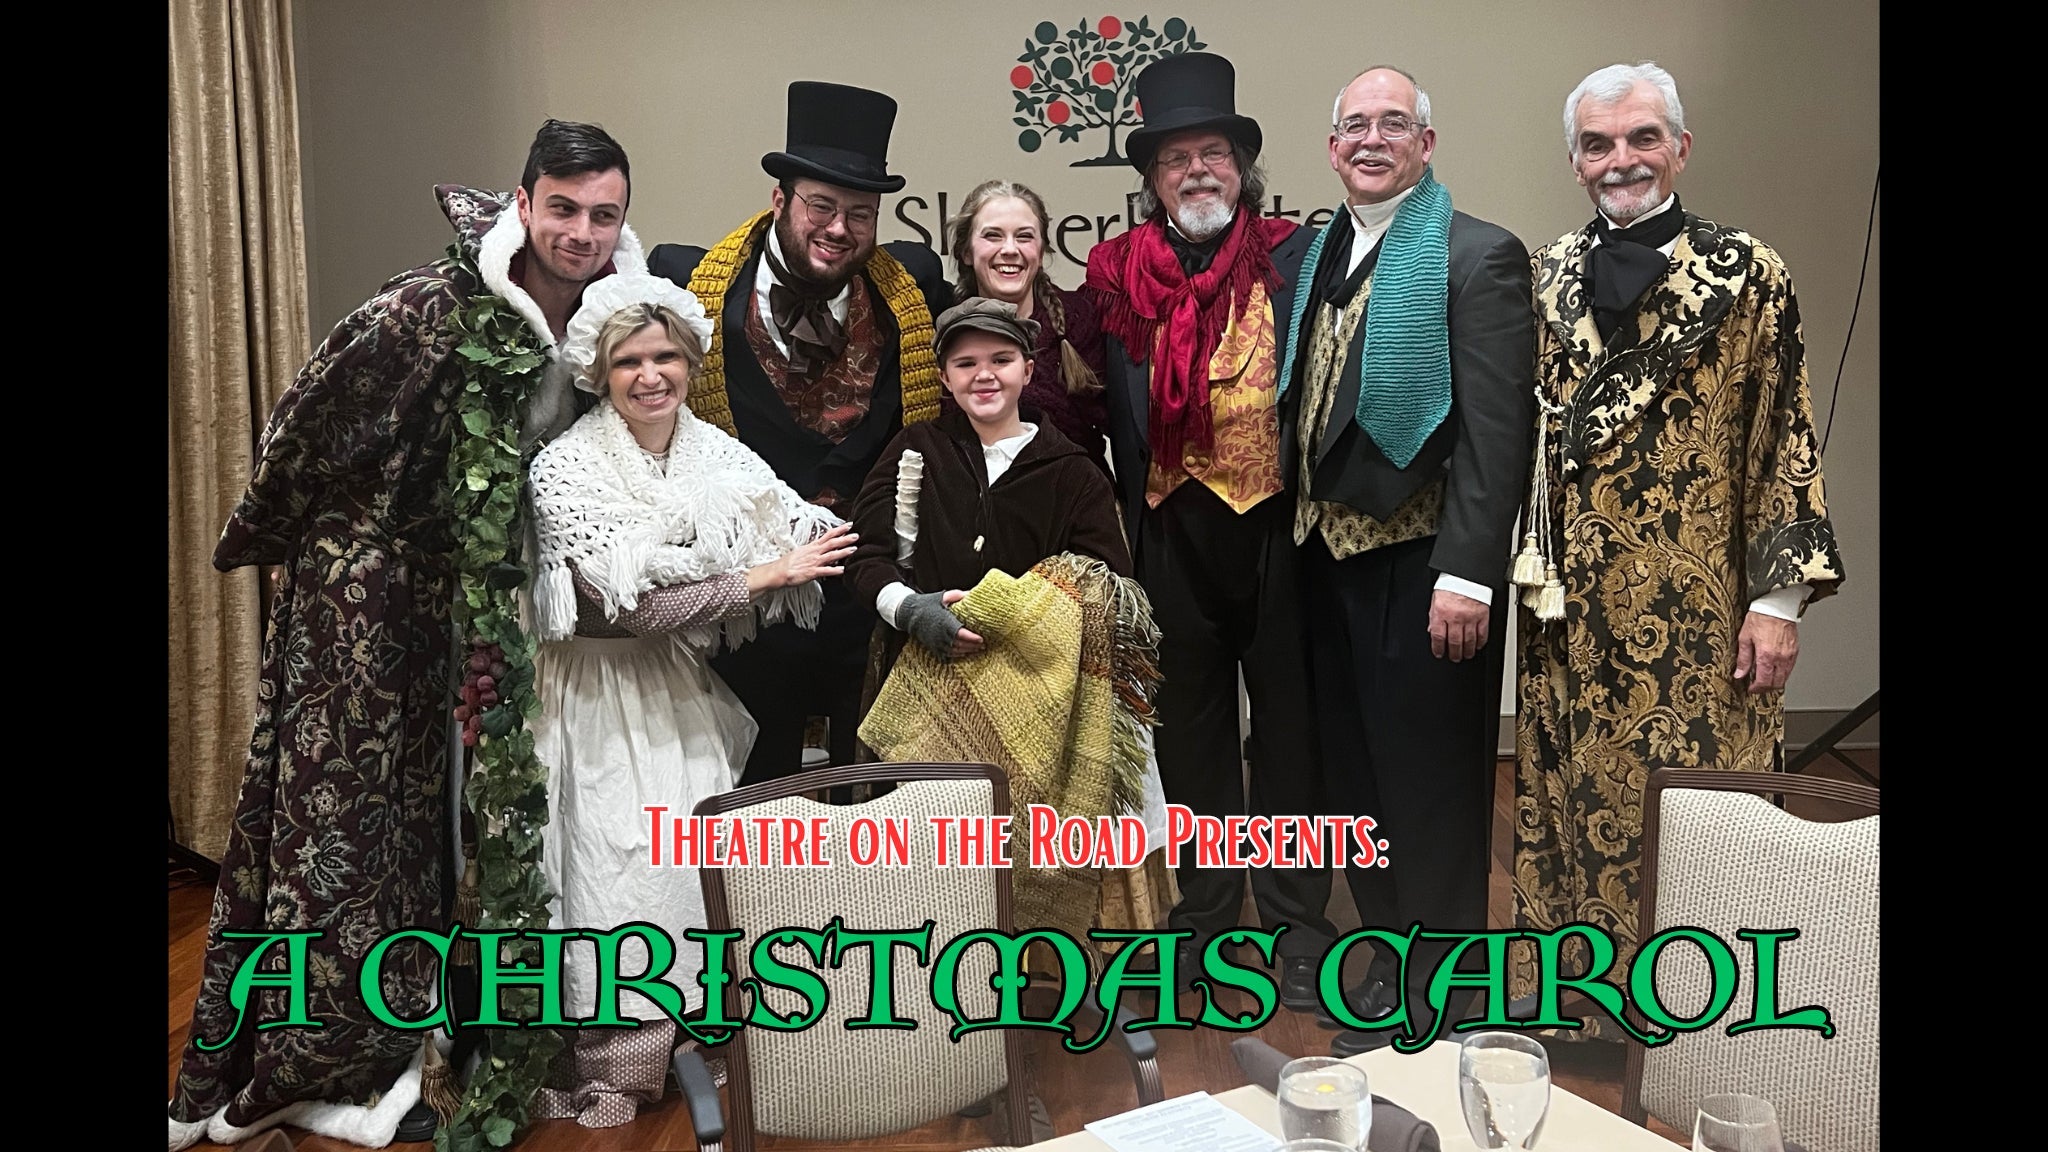 A Christmas Carol: A Live Interactive Family Experience in Milford promo photo for Black Friday 20& Off Sale presale offer code